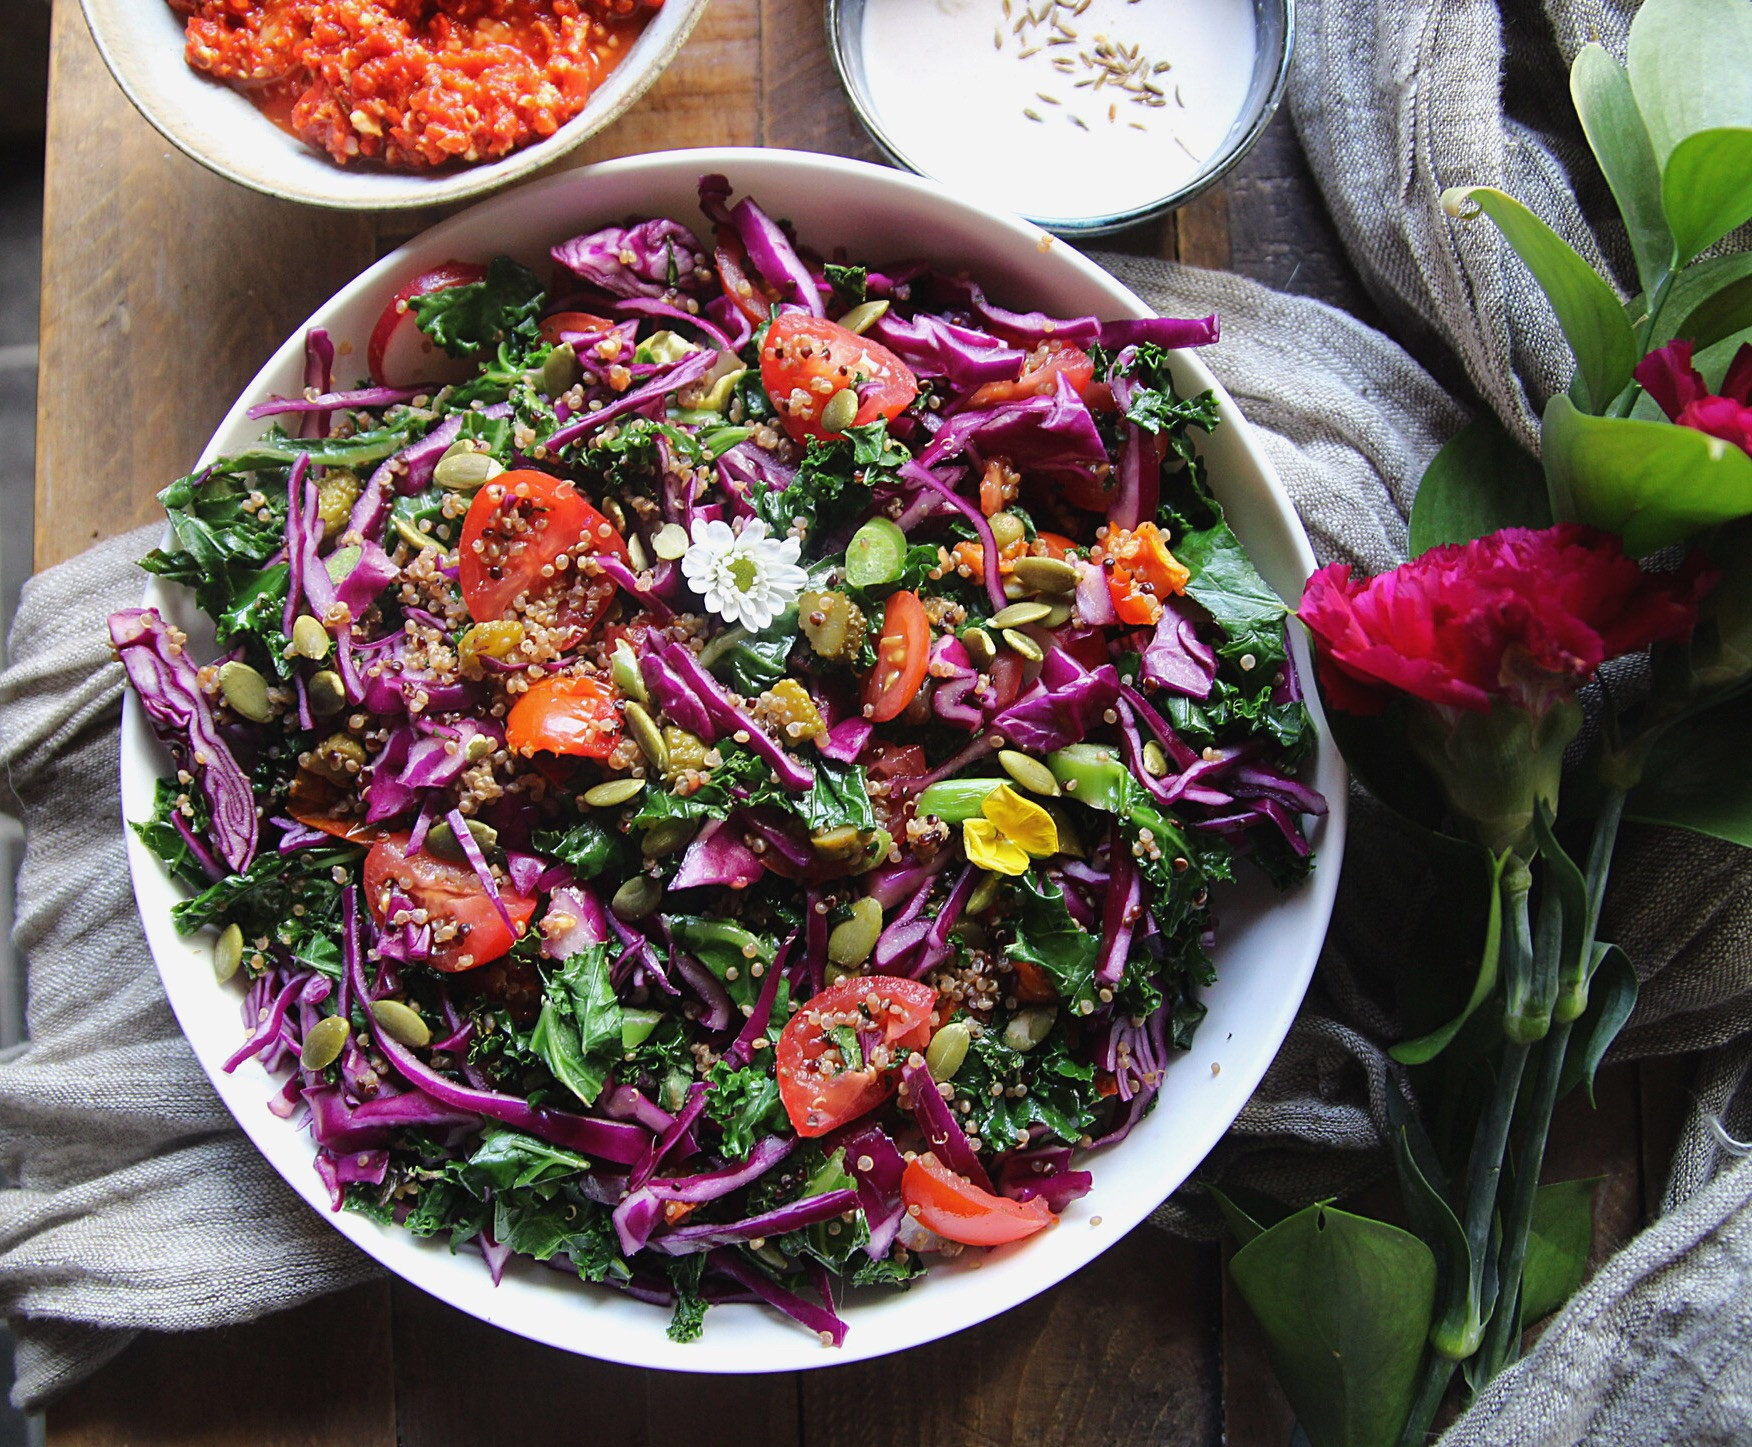 Healthy Red Cabbage Recipes
 Super Healthy Kale and Red Cabbage Salad Rebel Recipes